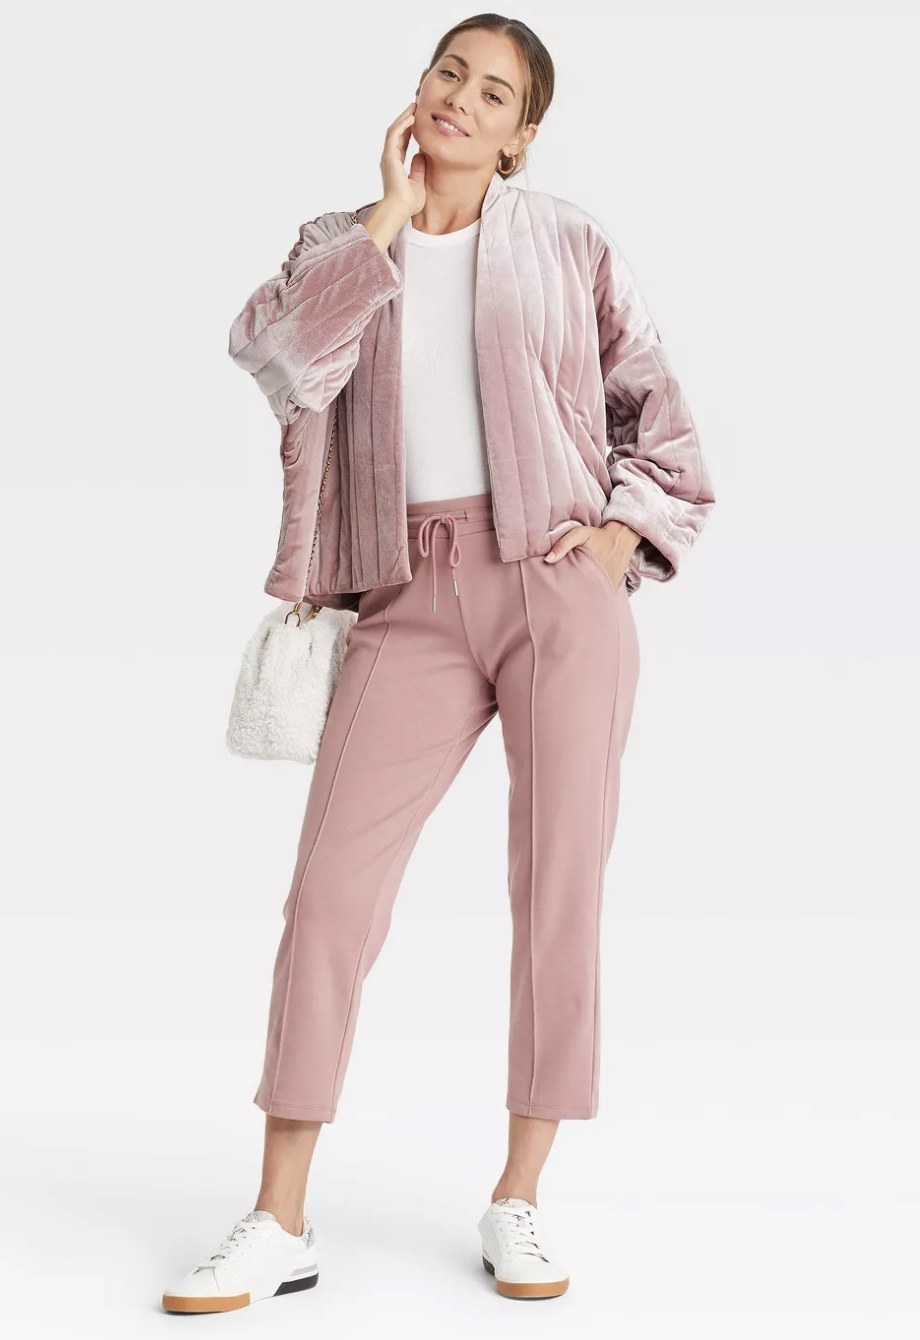 The open soft jacket is light pink with vertical pleats and is a light bubblegum pink